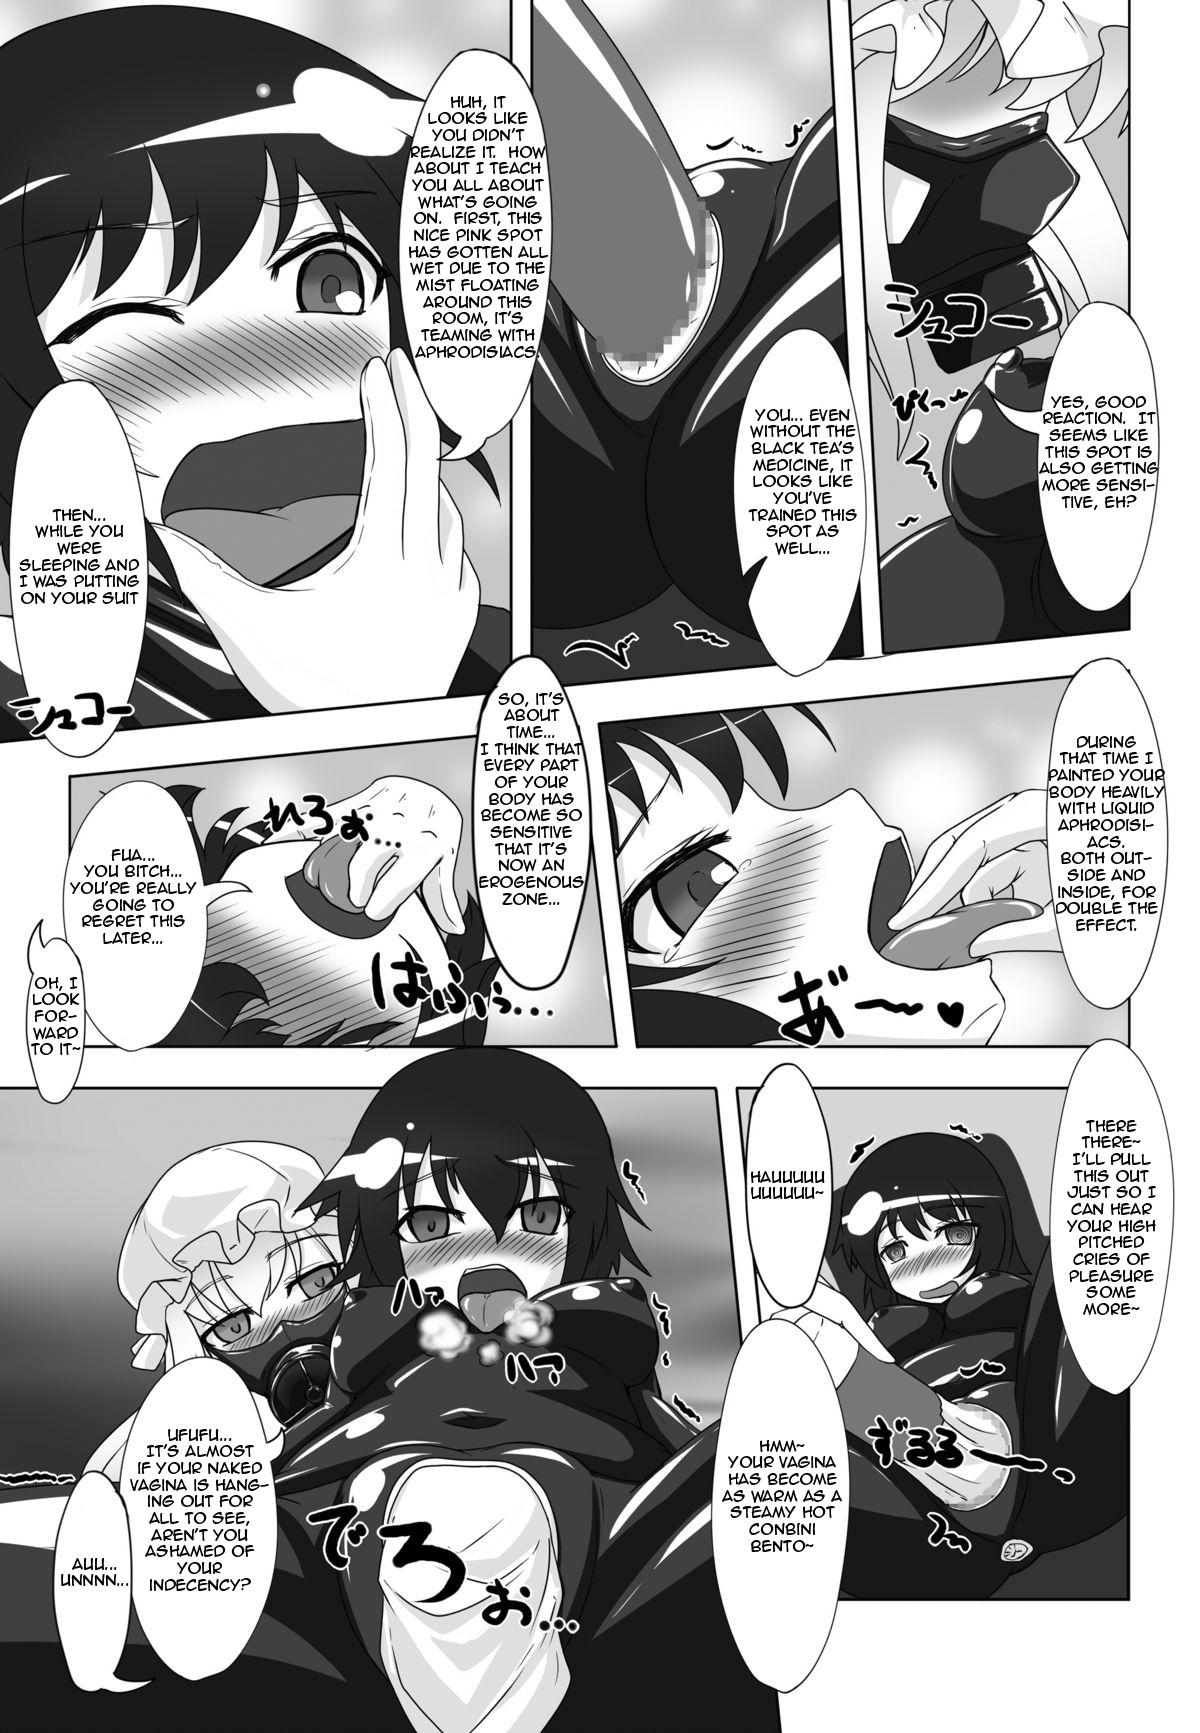 Scissoring 2nd Skin Vol. 1 - Touhou project Gay Black - Page 12